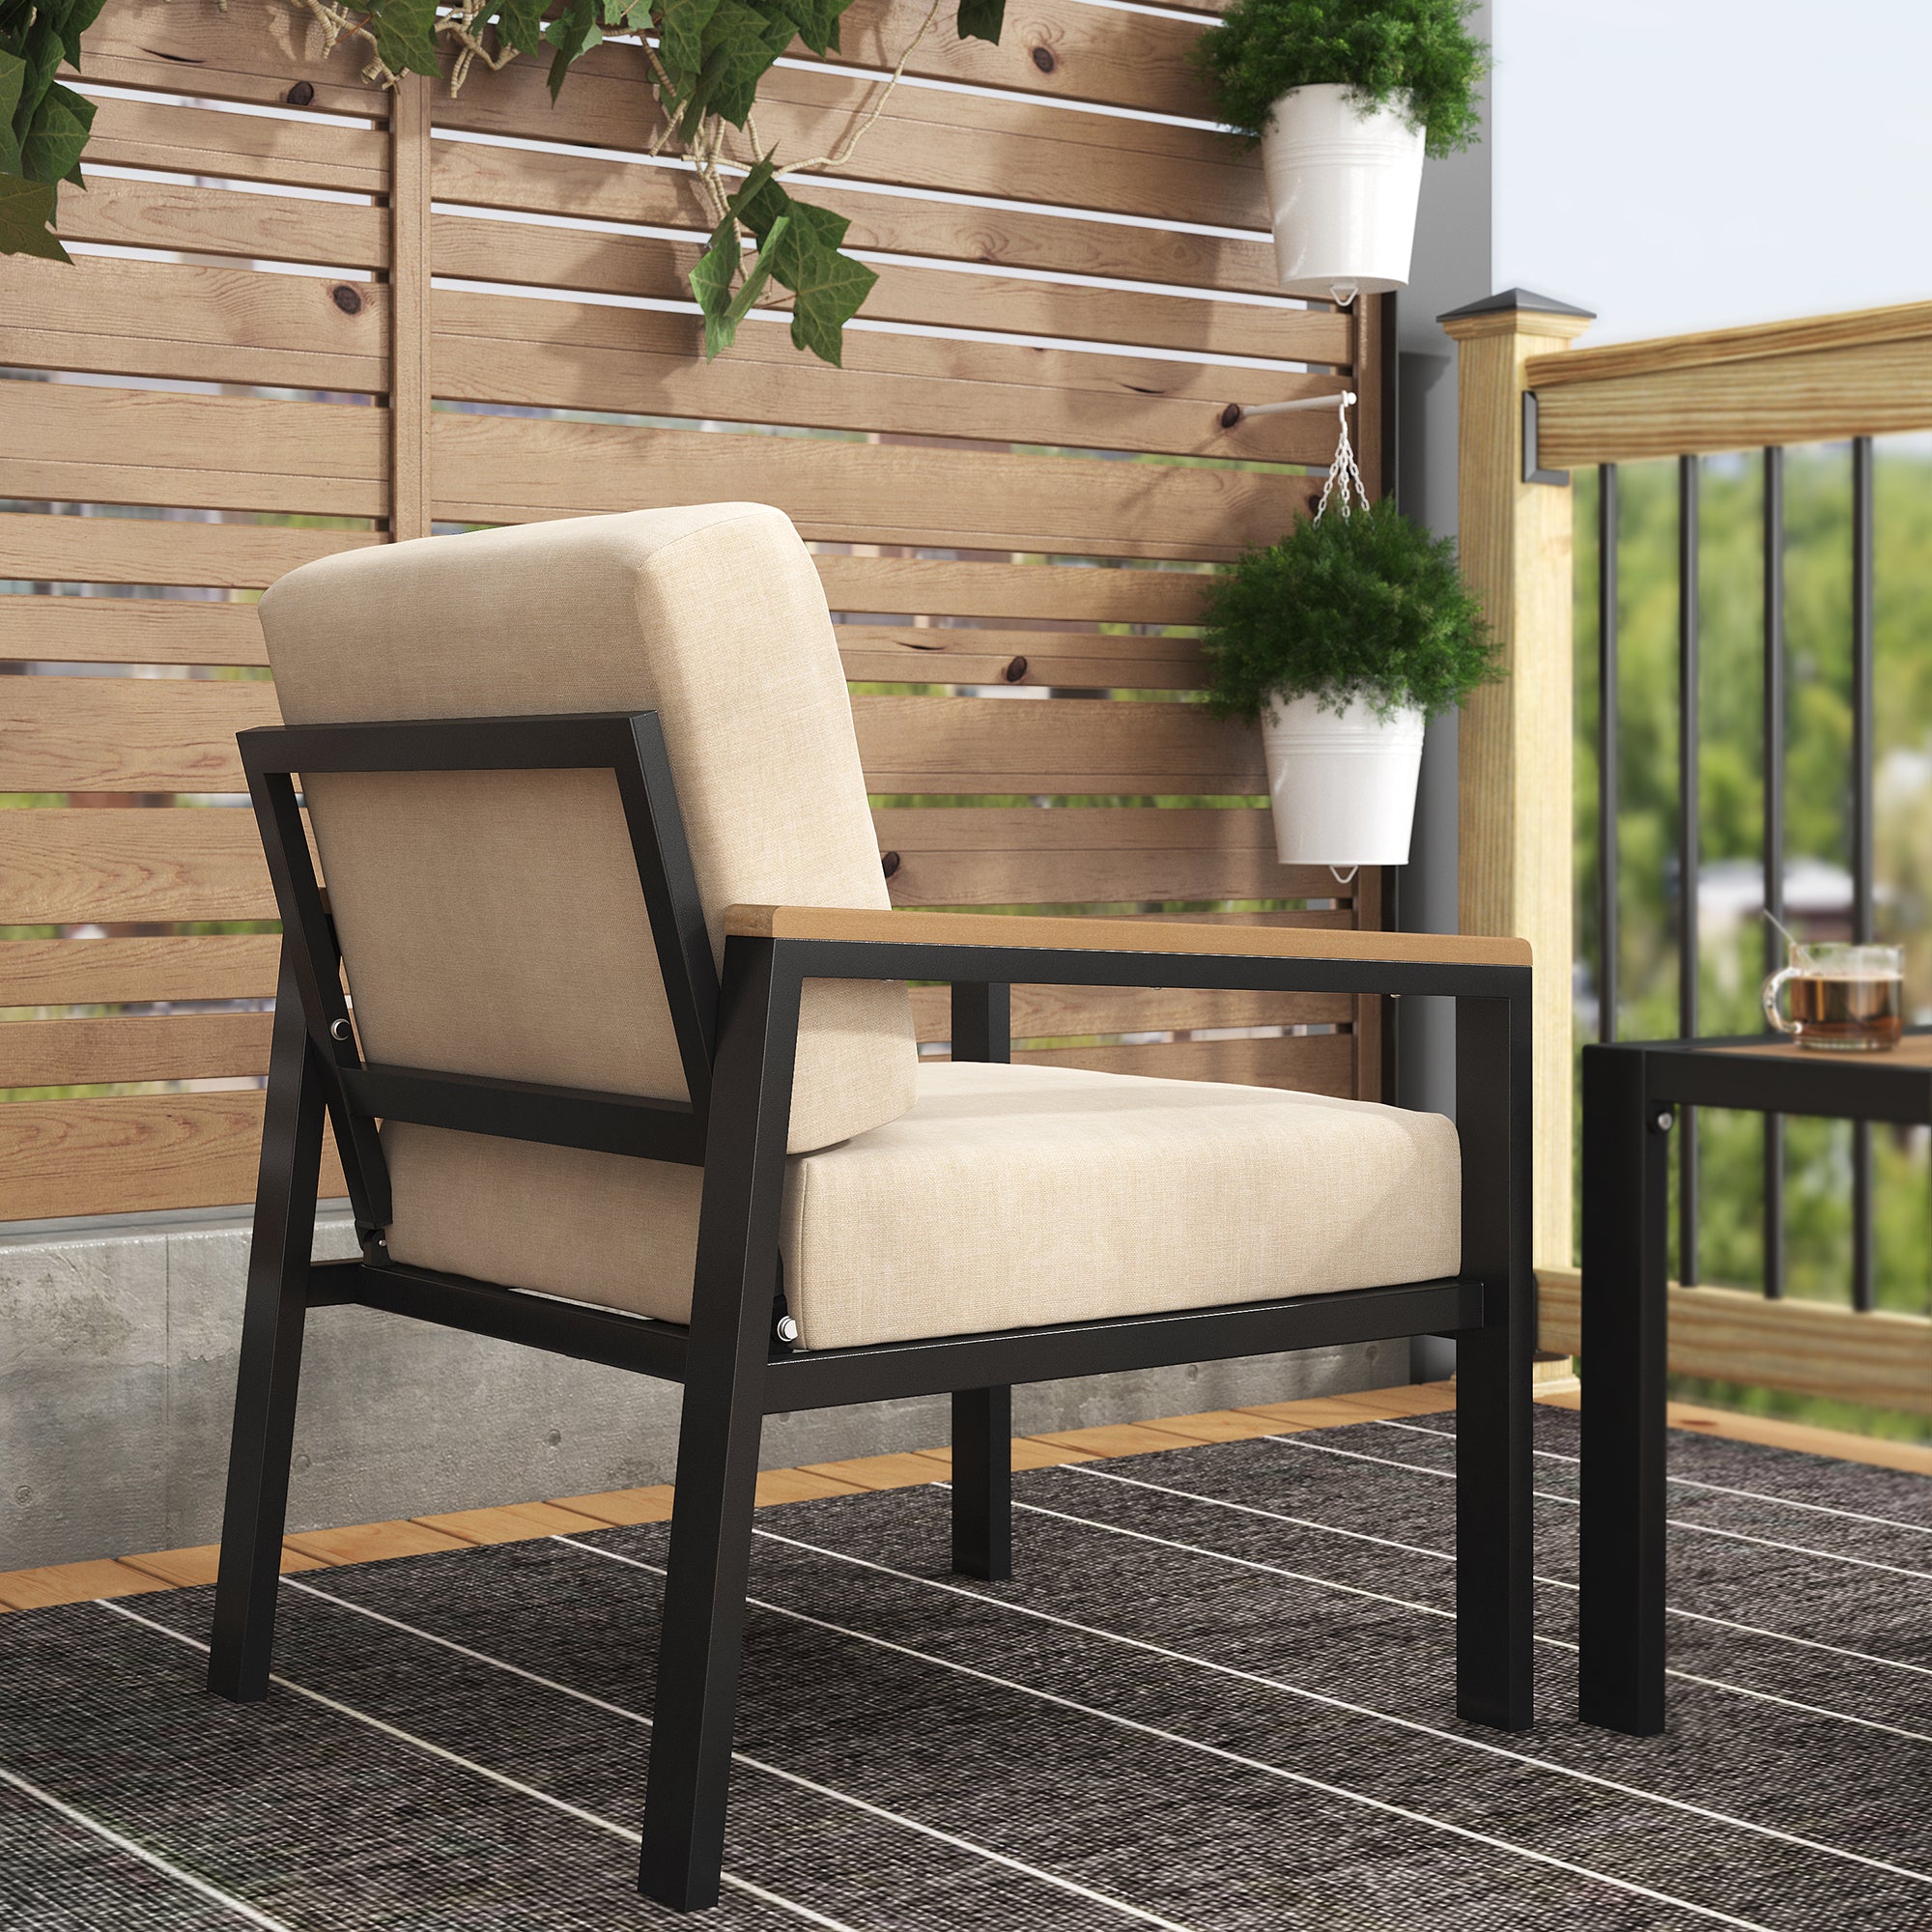 Dillon Outdoor Chat Set